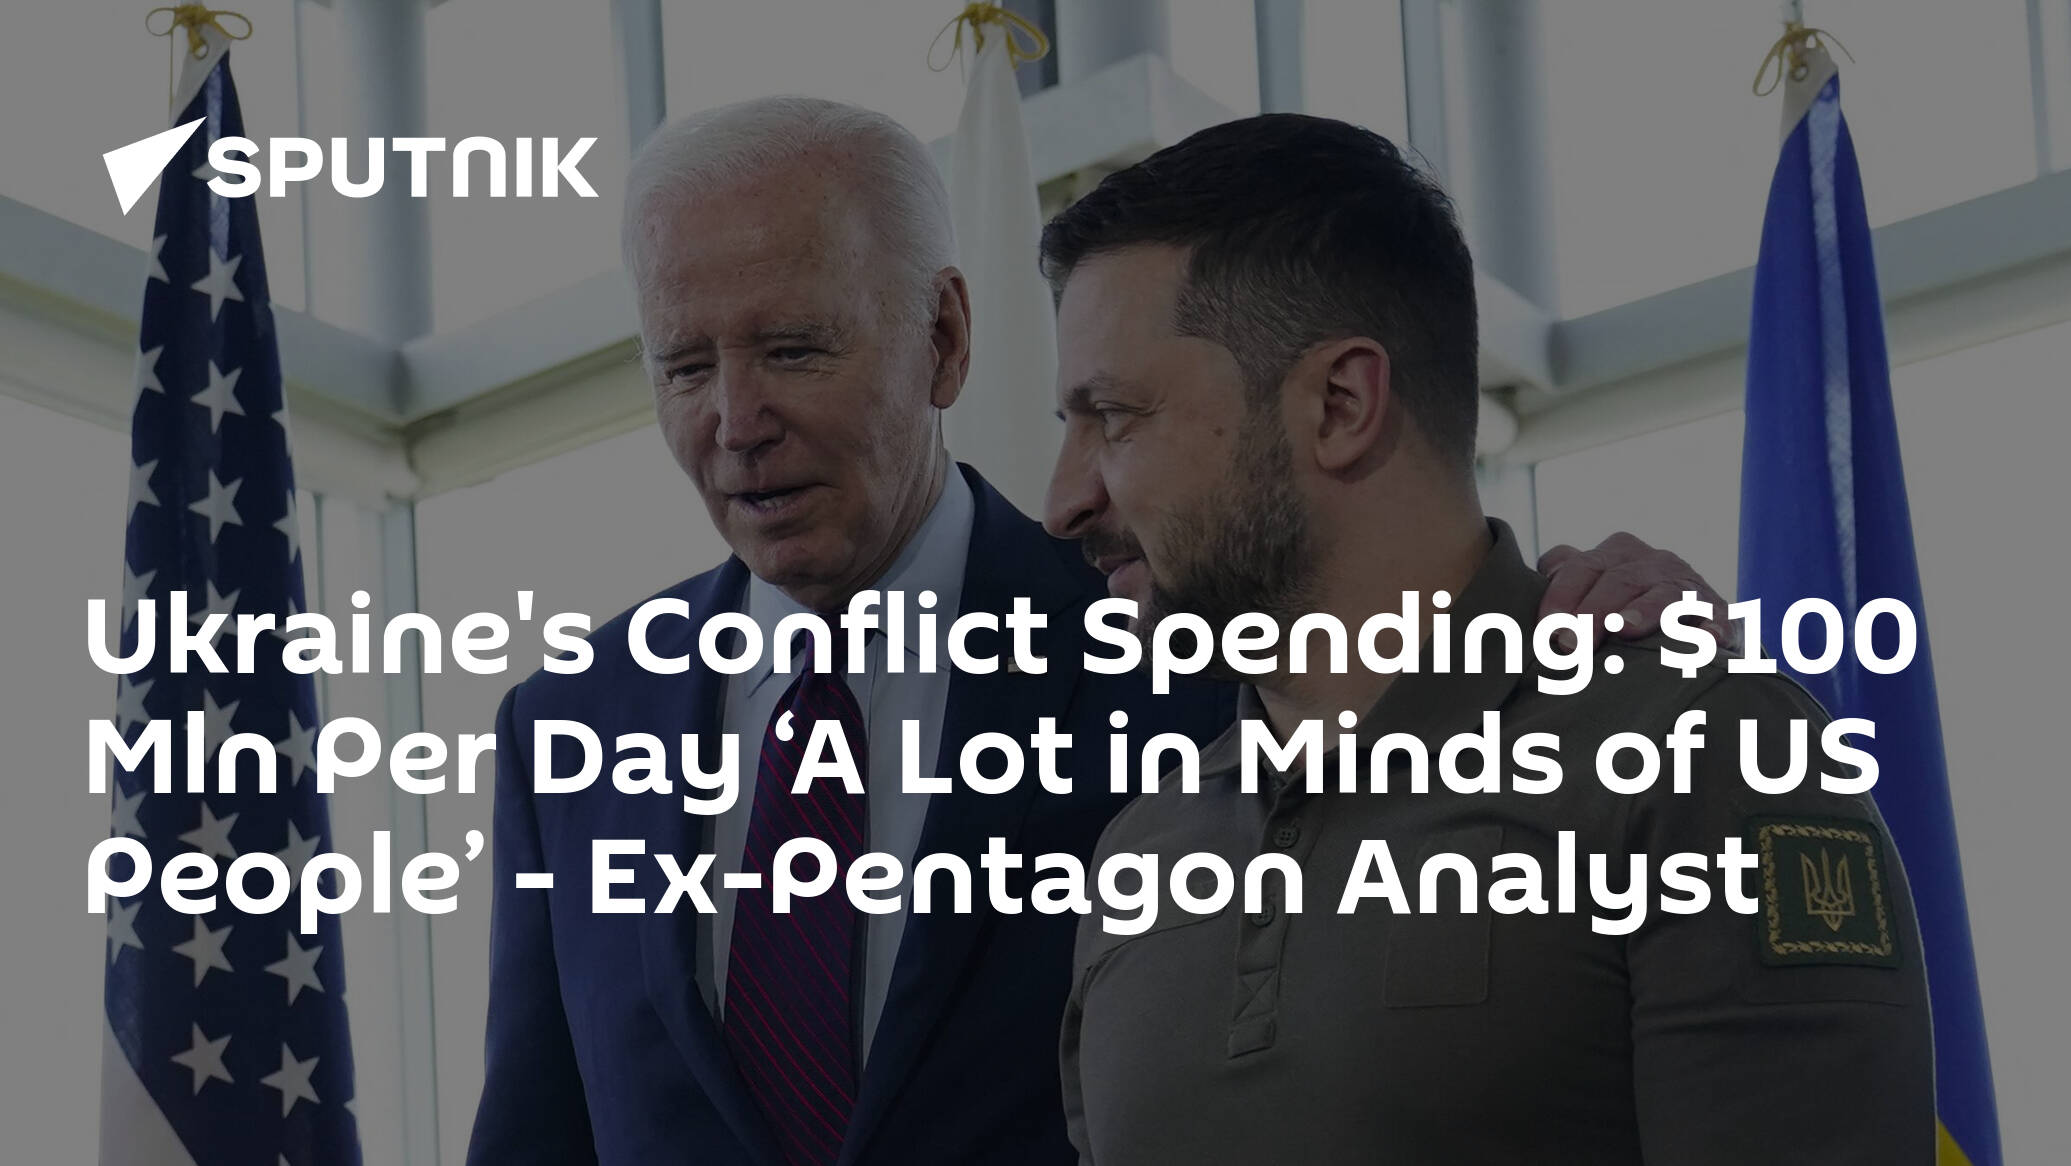 Ukraine's Conflict Spending: 0 Mln Per Day ‘A Lot in Minds of US People’ – Ex-Pentagon Analyst